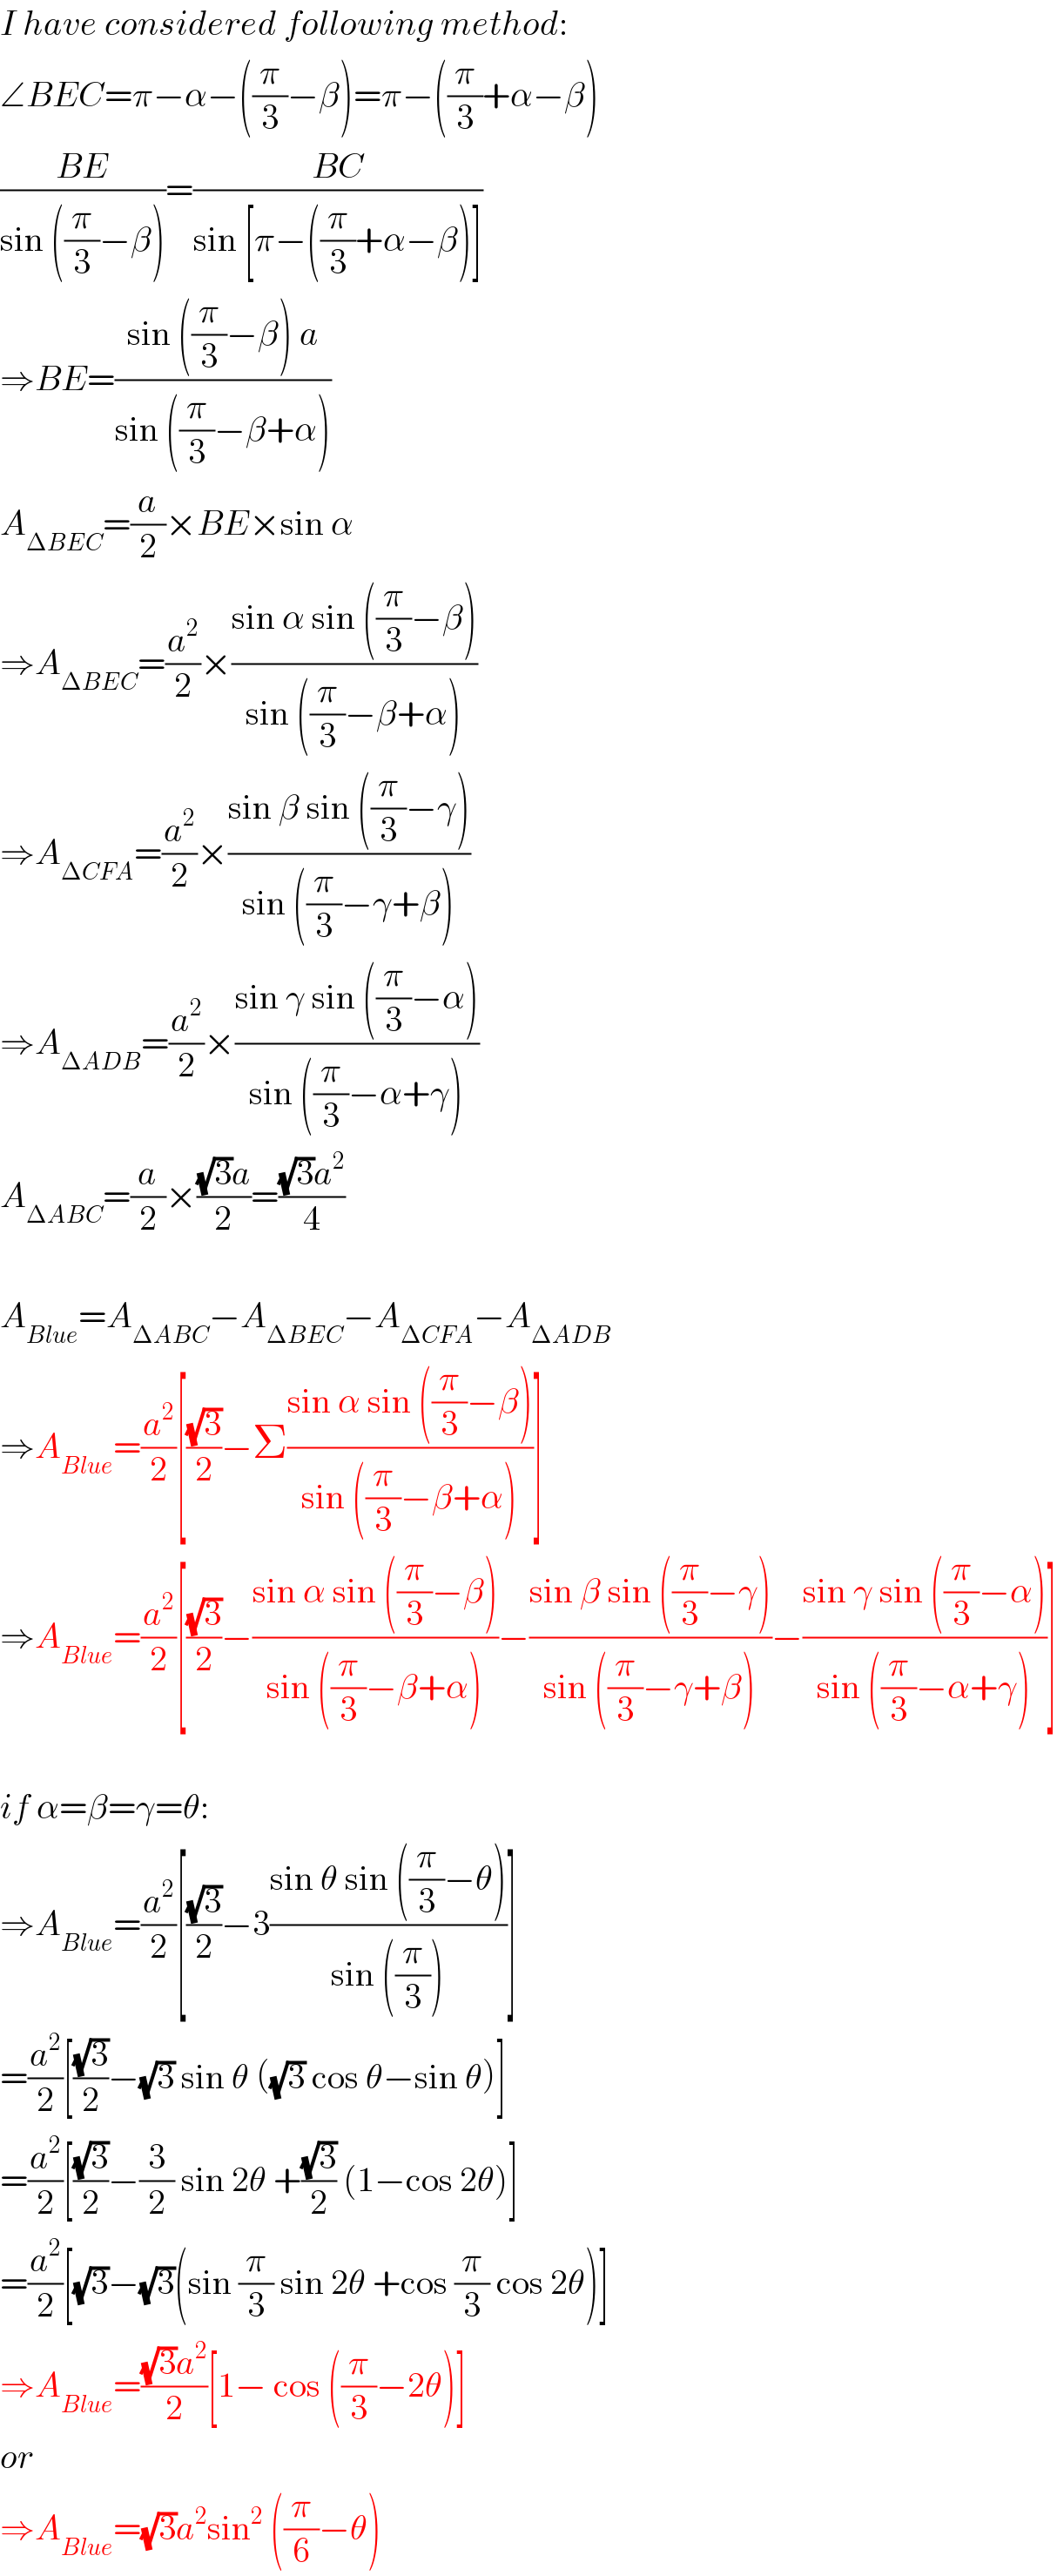 I have considered following method:  ∠BEC=π−α−((π/3)−β)=π−((π/3)+α−β)  ((BE)/(sin ((π/3)−β)))=((BC)/(sin [π−((π/3)+α−β)]))  ⇒BE=((sin ((π/3)−β) a)/(sin ((π/3)−β+α)))  A_(ΔBEC) =(a/2)×BE×sin α  ⇒A_(ΔBEC) =(a^2 /2)×((sin α sin ((π/3)−β))/(sin ((π/3)−β+α)))  ⇒A_(ΔCFA) =(a^2 /2)×((sin β sin ((π/3)−γ))/(sin ((π/3)−γ+β)))  ⇒A_(ΔADB) =(a^2 /2)×((sin γ sin ((π/3)−α))/(sin ((π/3)−α+γ)))  A_(ΔABC) =(a/2)×(((√3)a)/2)=(((√3)a^2 )/4)    A_(Blue) =A_(ΔABC) −A_(ΔBEC) −A_(ΔCFA) −A_(ΔADB)   ⇒A_(Blue) =(a^2 /2)[((√3)/2)−Σ((sin α sin ((π/3)−β))/(sin ((π/3)−β+α)))]  ⇒A_(Blue) =(a^2 /2)[((√3)/2)−((sin α sin ((π/3)−β))/(sin ((π/3)−β+α)))−((sin β sin ((π/3)−γ))/(sin ((π/3)−γ+β)))−((sin γ sin ((π/3)−α))/(sin ((π/3)−α+γ)))]    if α=β=γ=θ:  ⇒A_(Blue) =(a^2 /2)[((√3)/2)−3((sin θ sin ((π/3)−θ))/(sin ((π/3))))]  =(a^2 /2)[((√3)/2)−(√3) sin θ ((√3) cos θ−sin θ)]  =(a^2 /2)[((√3)/2)−(3/2) sin 2θ +((√3)/2) (1−cos 2θ)]  =(a^2 /2)[(√3)−(√3)(sin (π/3) sin 2θ +cos (π/3) cos 2θ)]  ⇒A_(Blue) =(((√3)a^2 )/2)[1− cos ((π/3)−2θ)]  or  ⇒A_(Blue) =(√3)a^2 sin^2  ((π/6)−θ)  